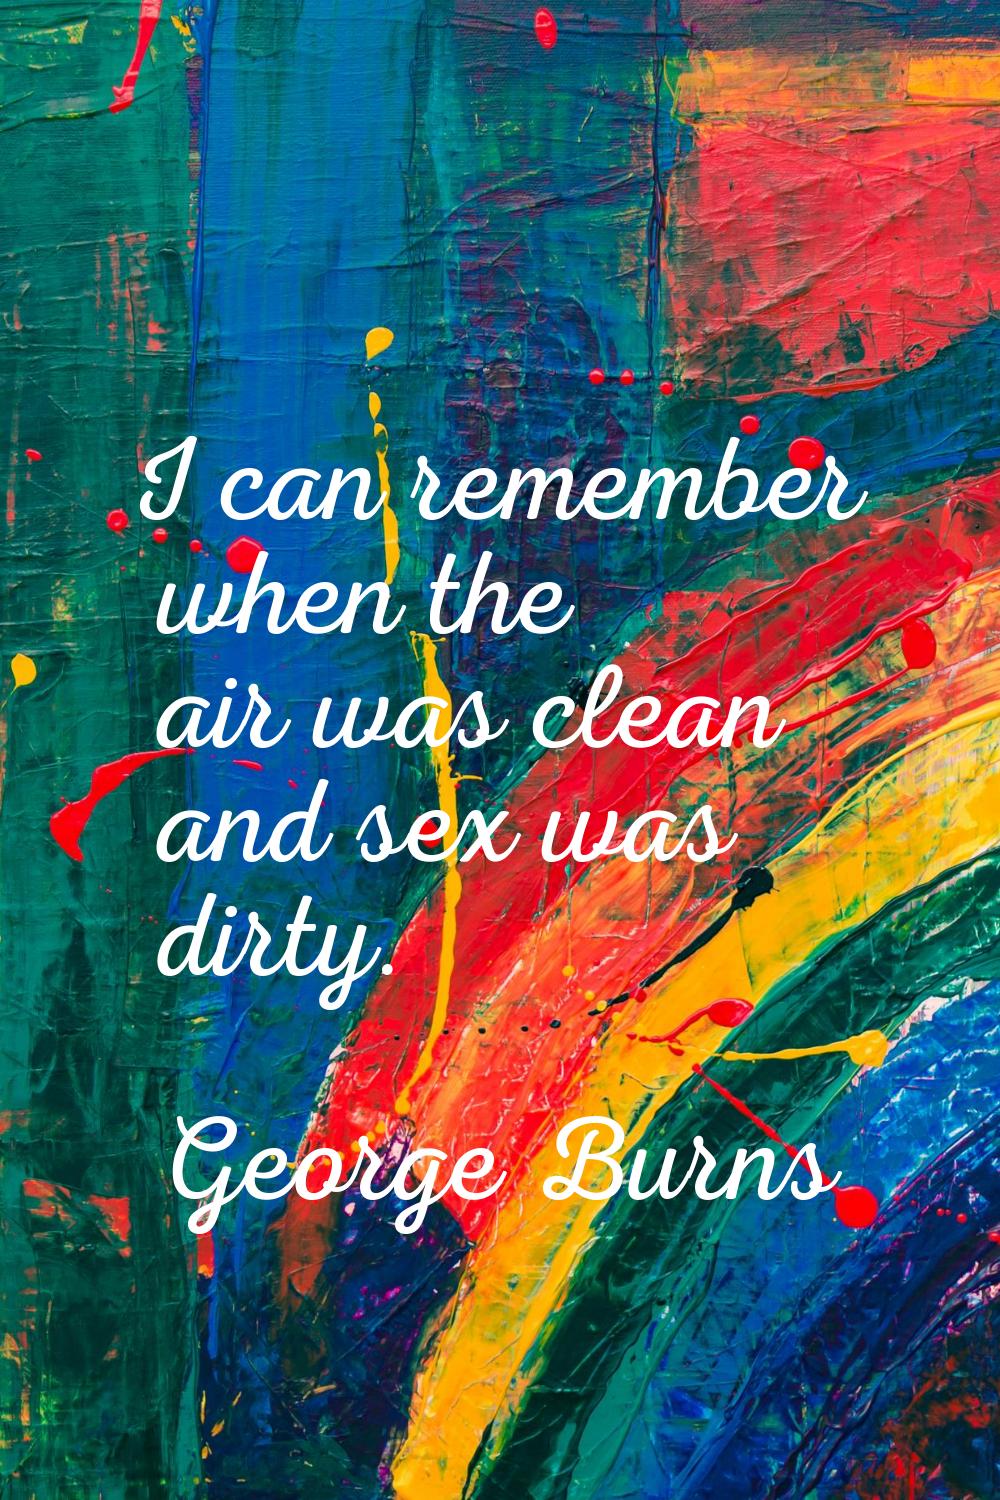 I can remember when the air was clean and sex was dirty.